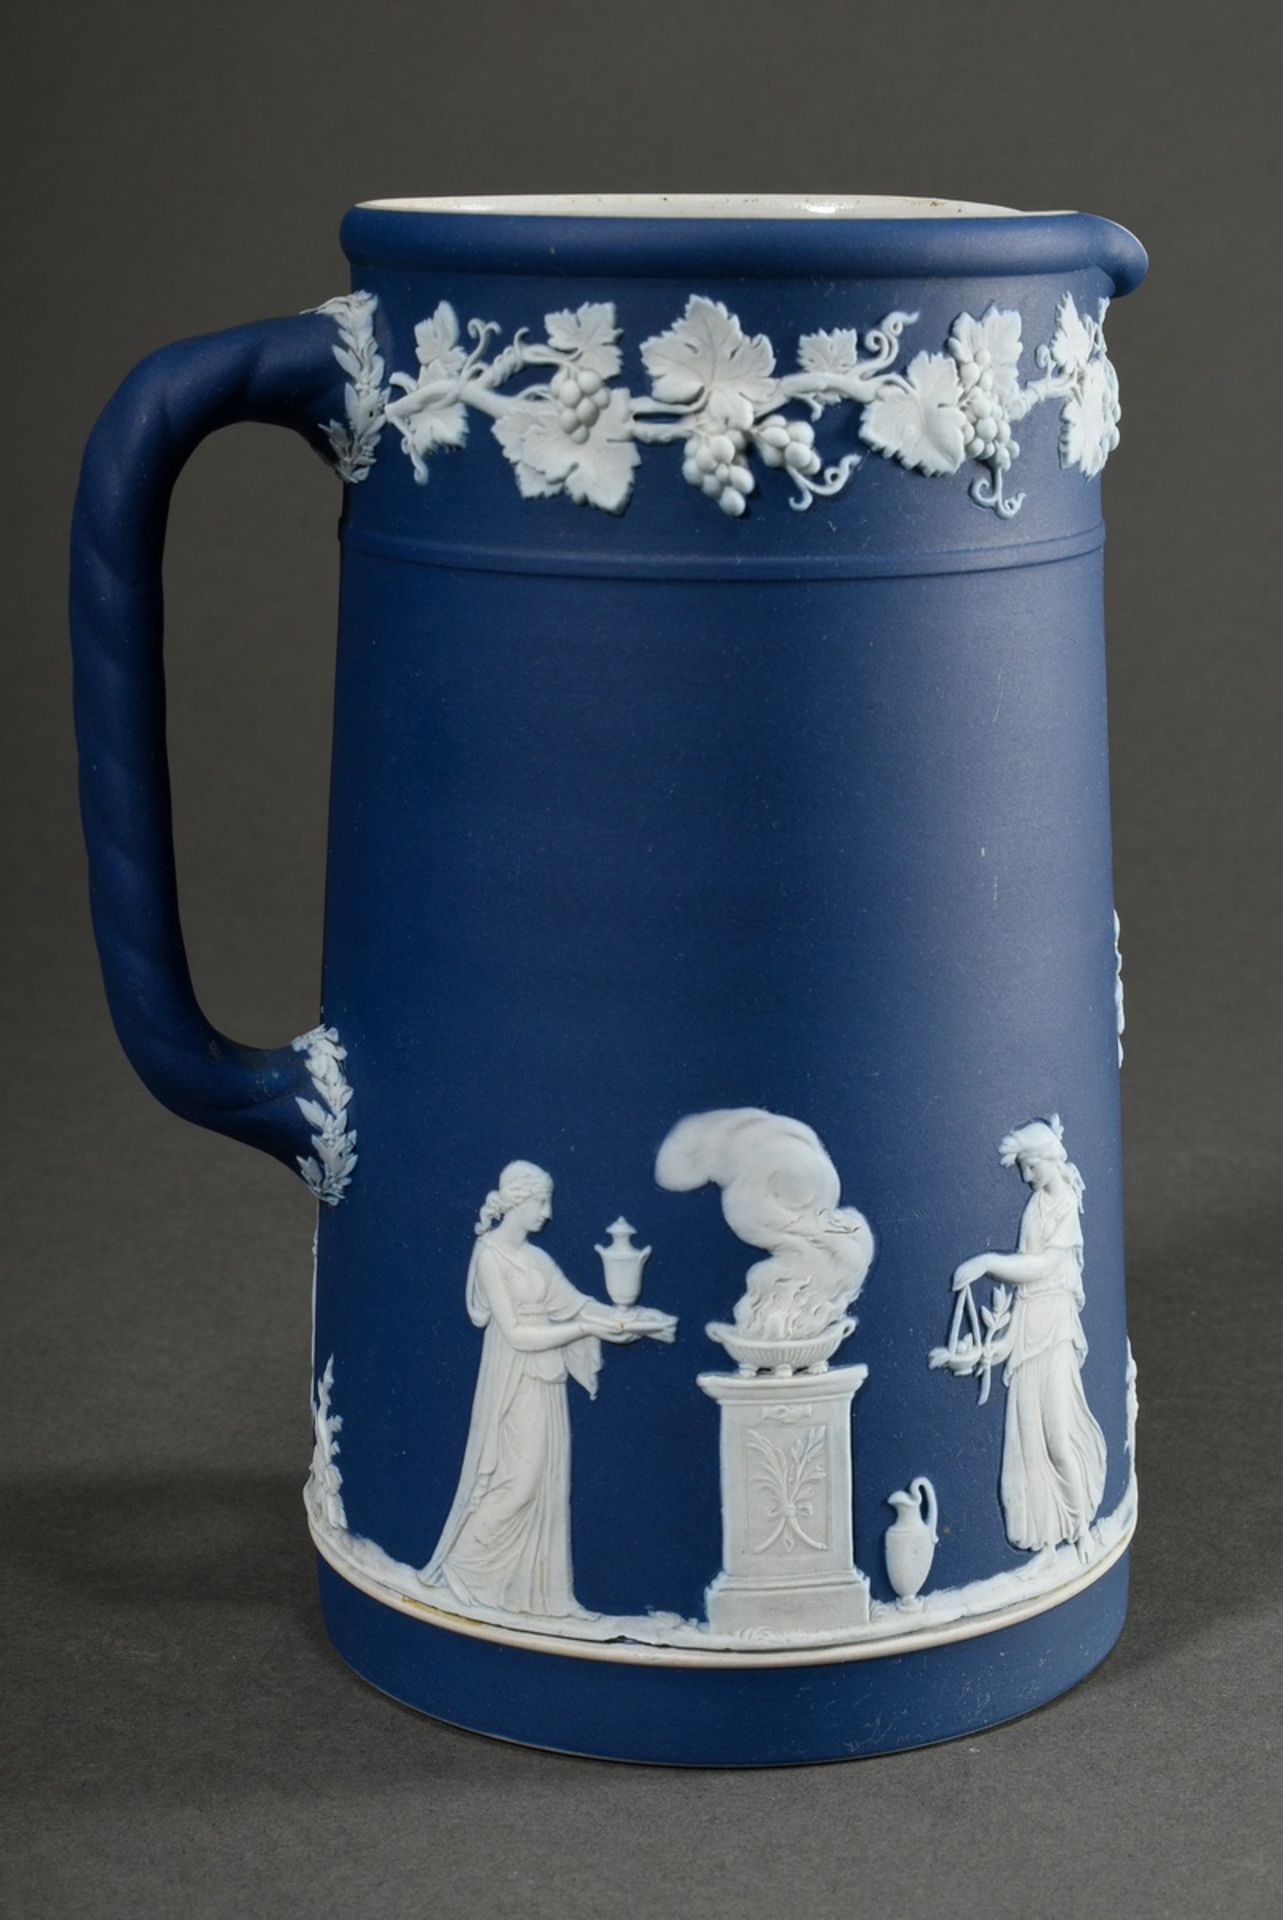 5 Various pieces Wedgwood Tête-à-Tête in blue jasperware with white bisque reliefs, England early 2 - Image 3 of 6